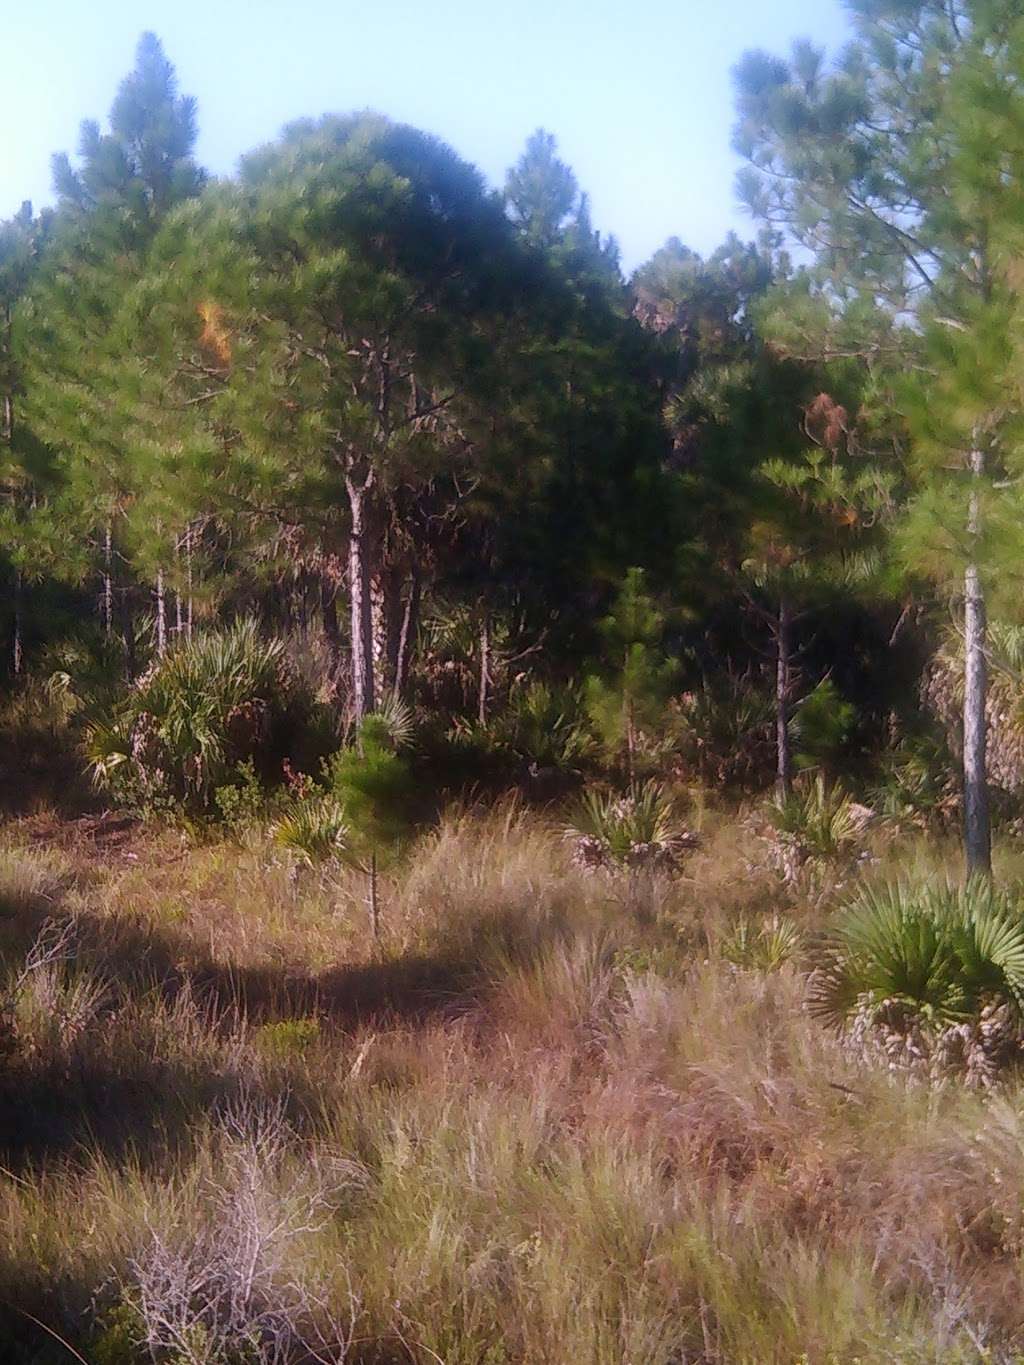 Buck Lake Conservation Area | 4077 Cinnamon Teal Dr, Mims, FL 32754, USA | Phone: (386) 329-4404